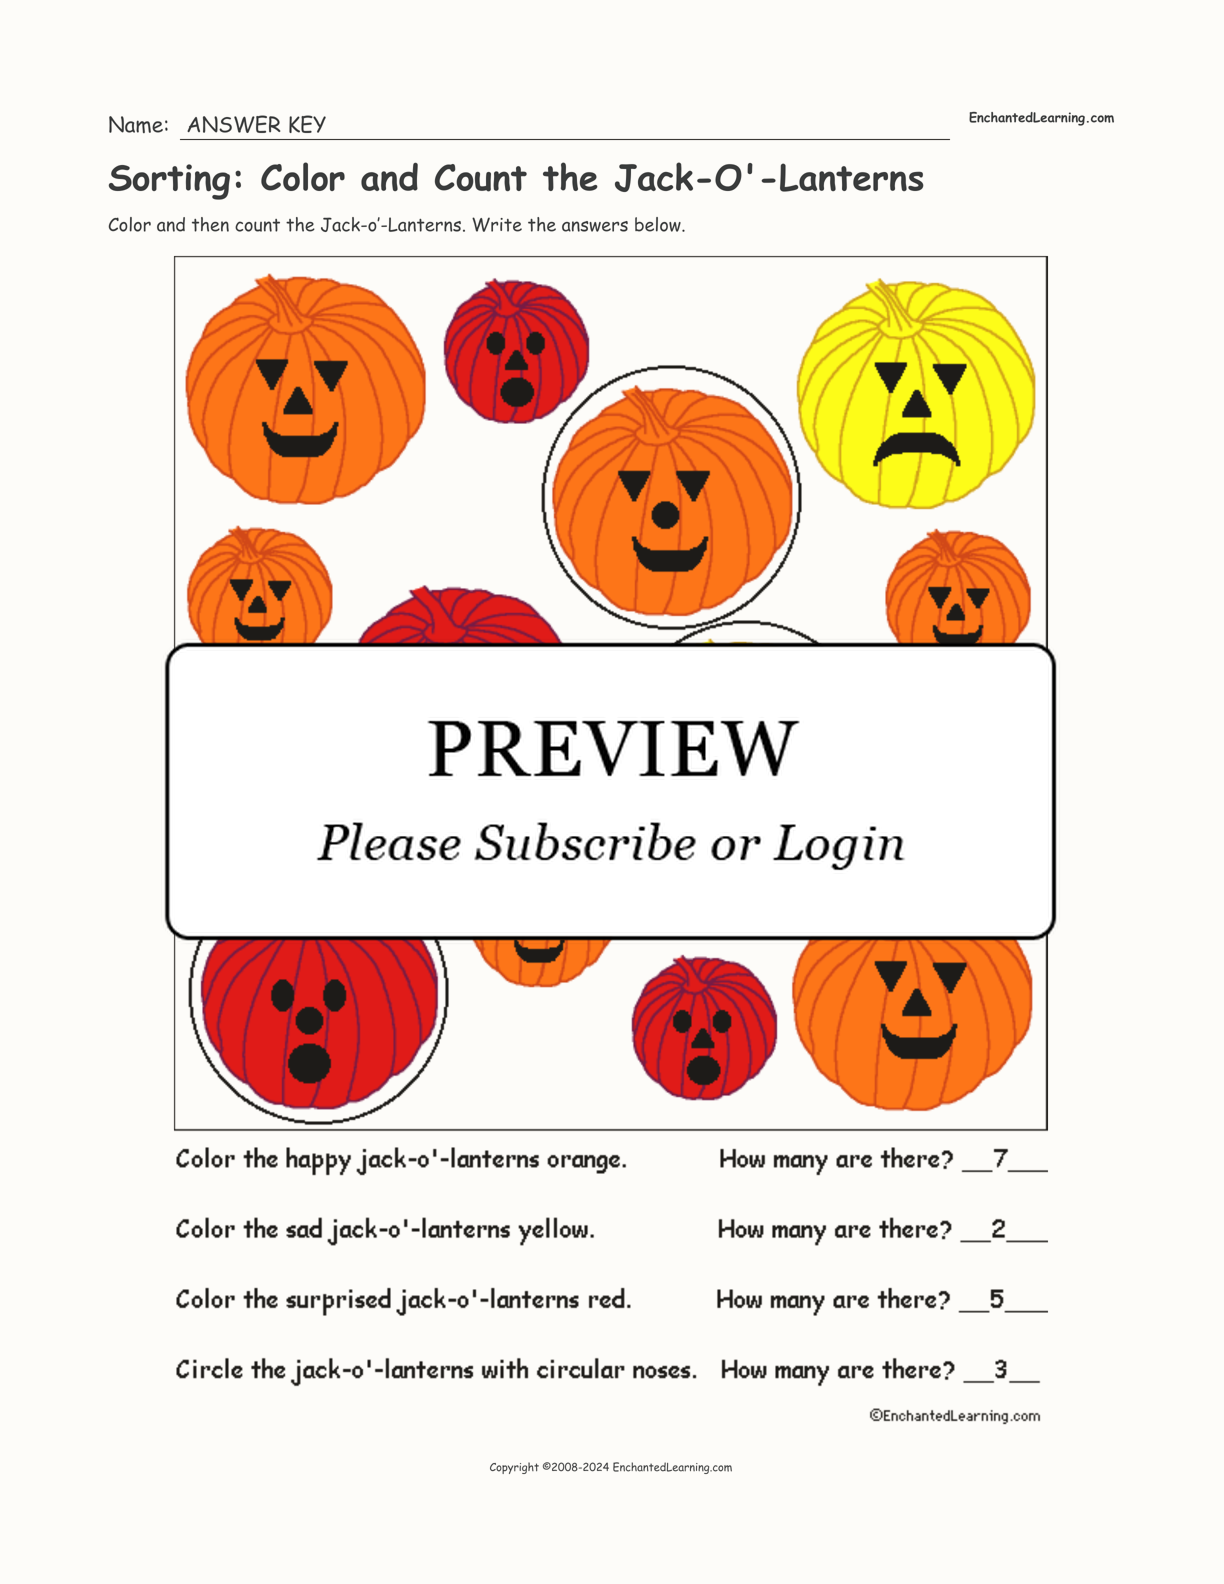 Sorting: Color and Count the Jack-O'-Lanterns interactive worksheet page 2